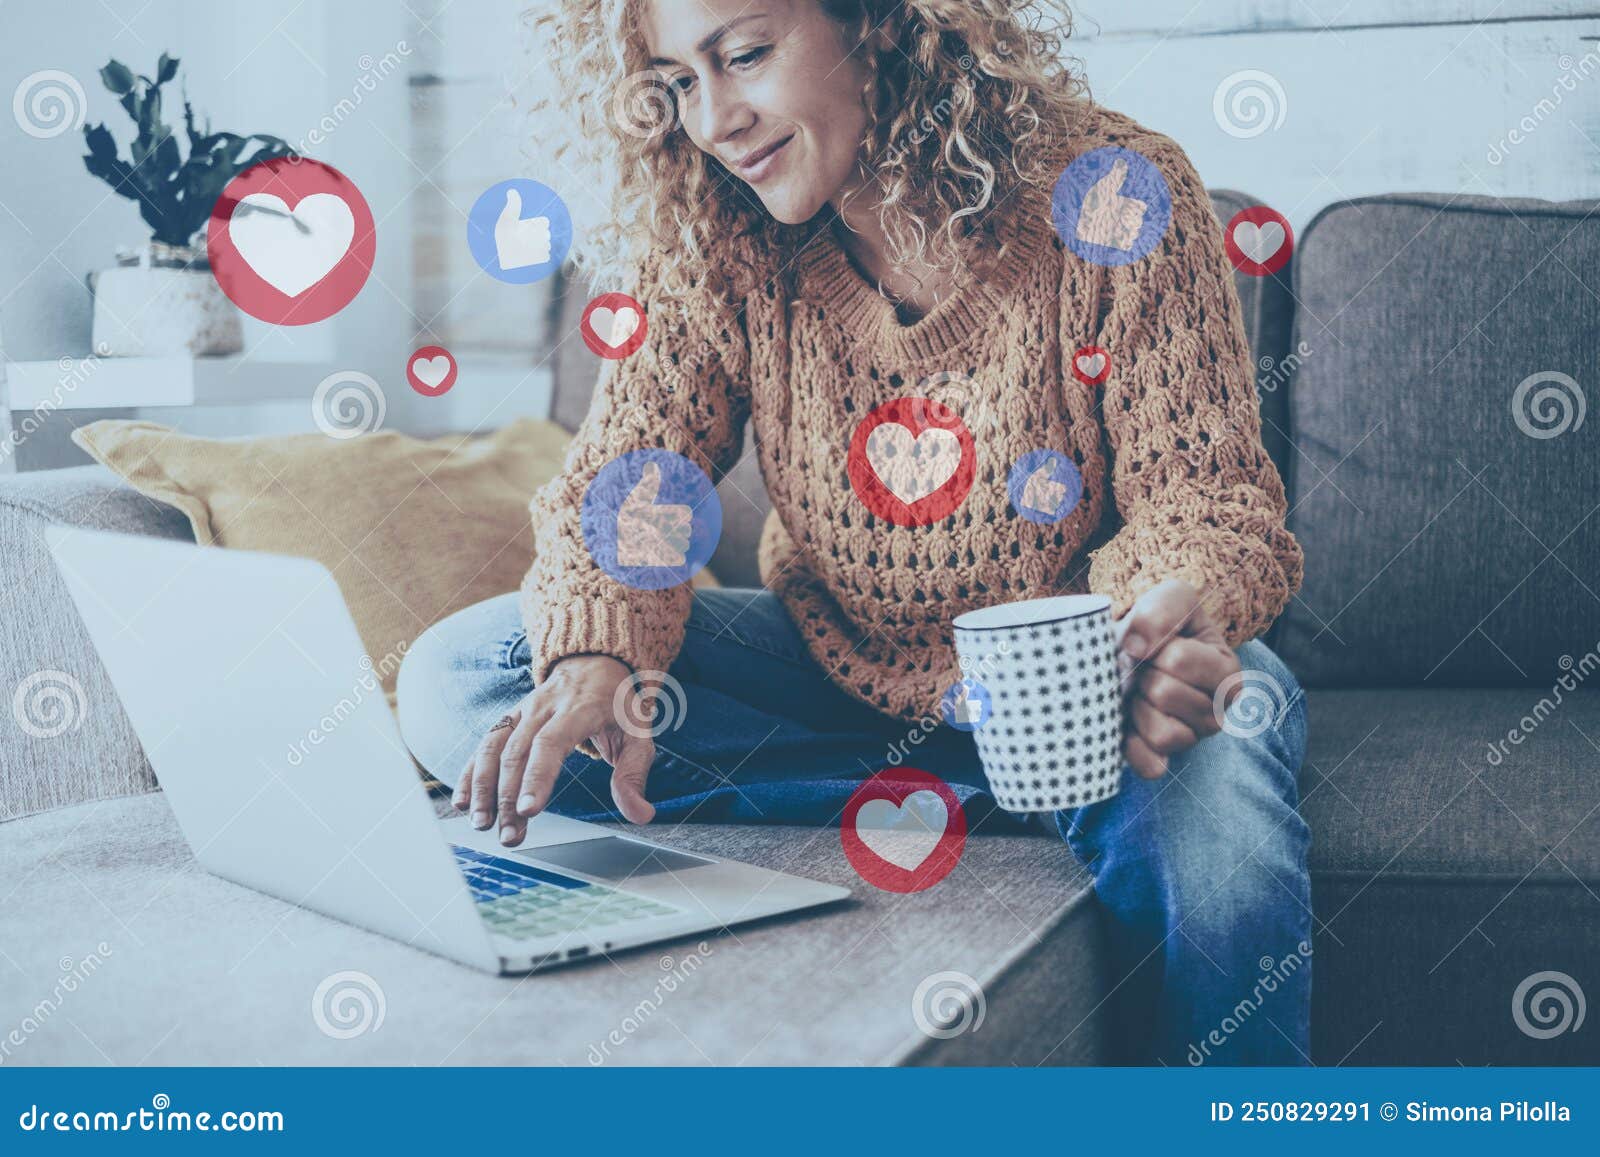 modern people using social media network on laptop at home. cheerful happy woman smile and write on computer. thumbs and heart